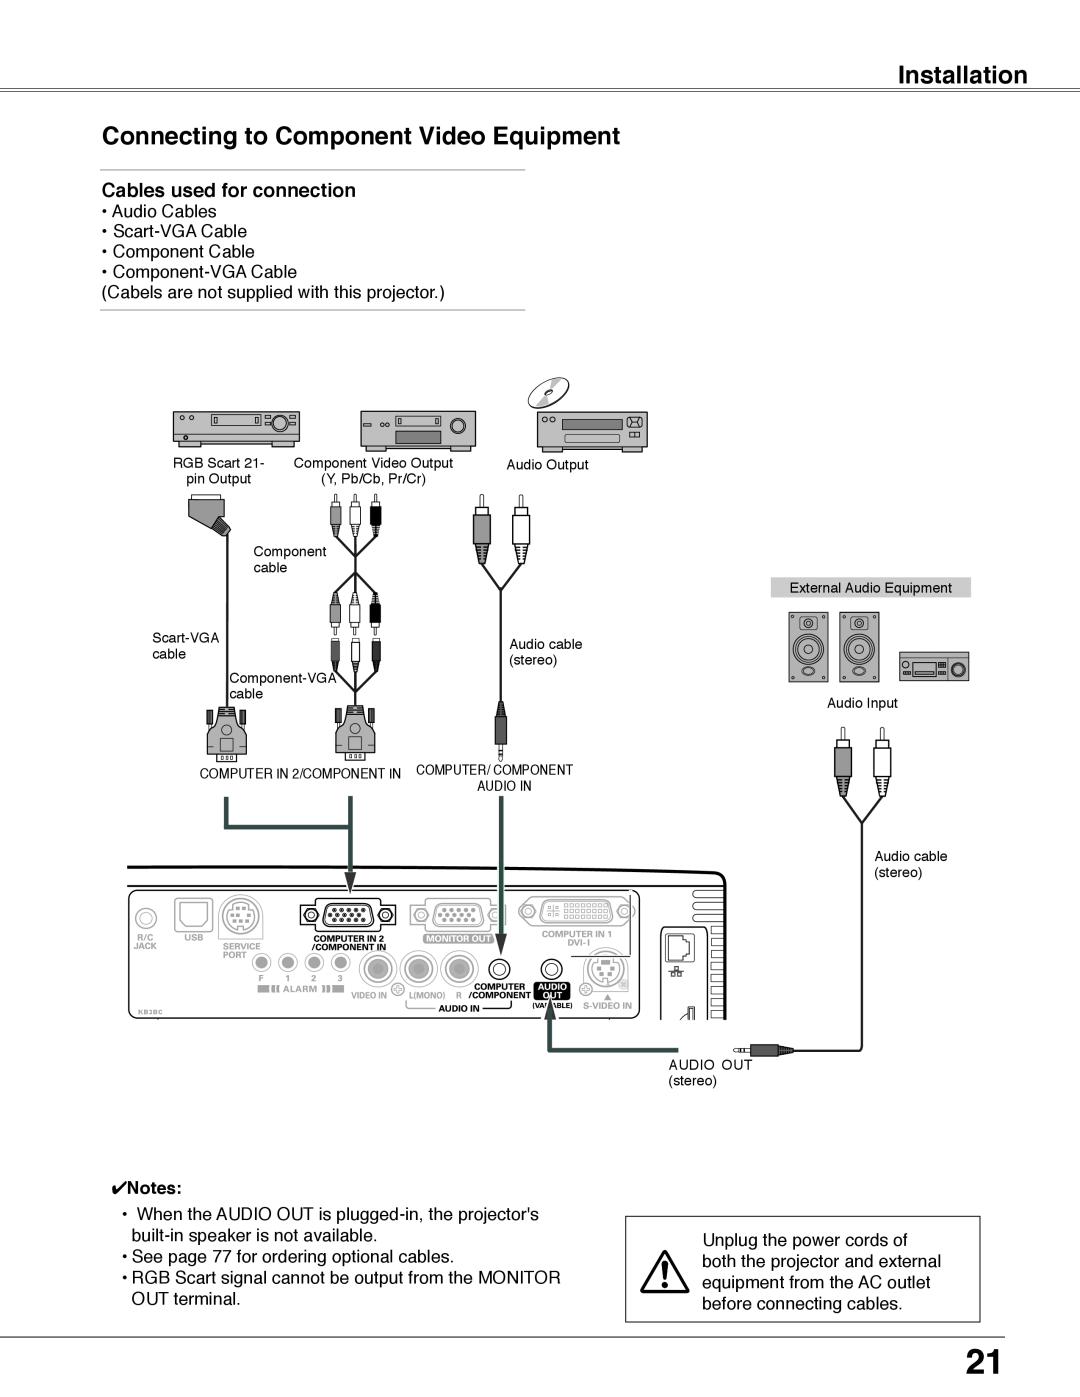 Eiki LC-WB40N owner manual Installation, Connecting to Component Video Equipment, Cables used for connection 